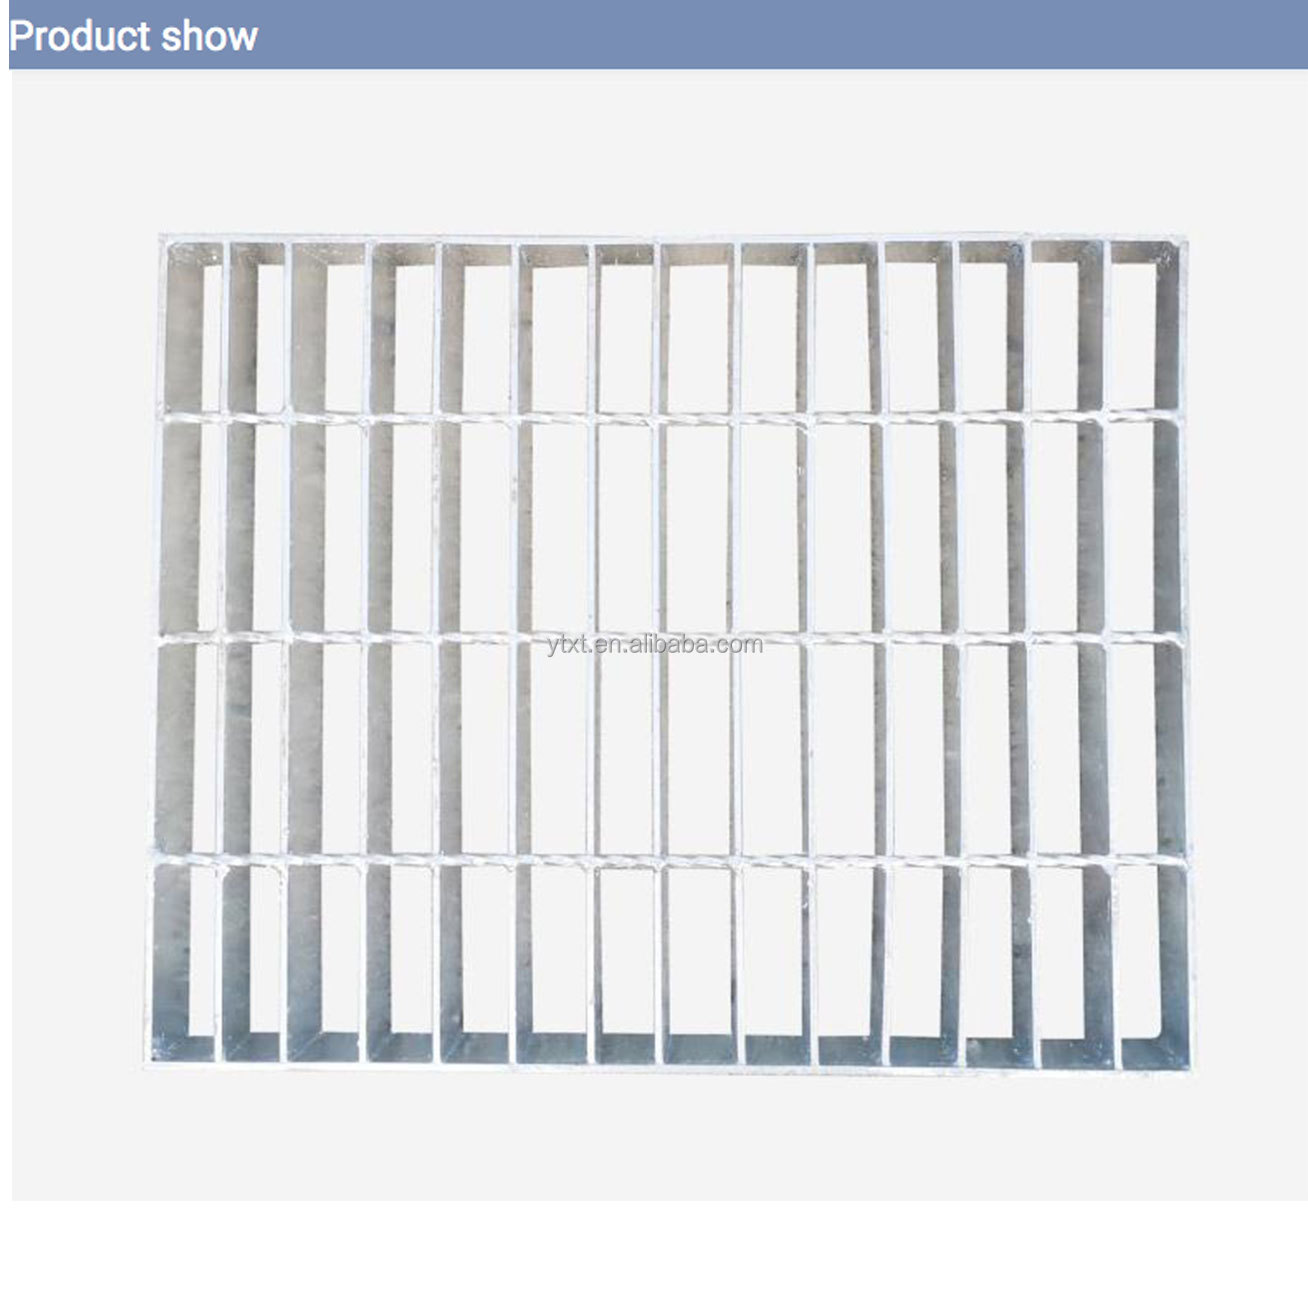 Galvanized Stainless Clip grating weight per square Round Steel Grating